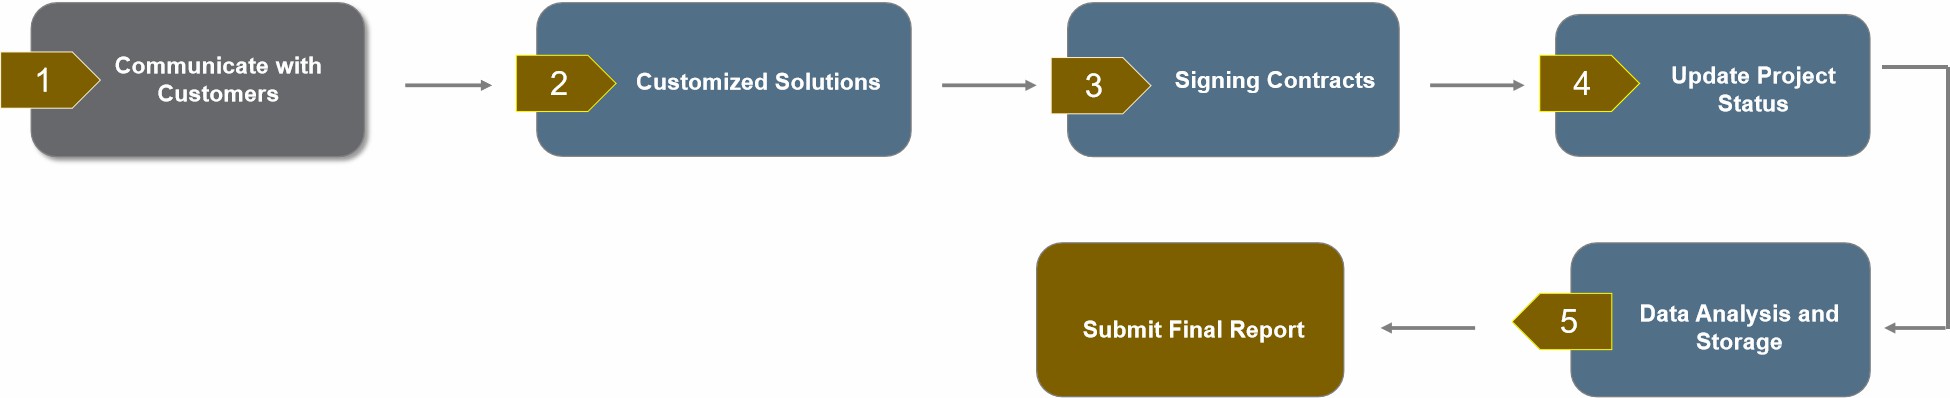 Our services workflow